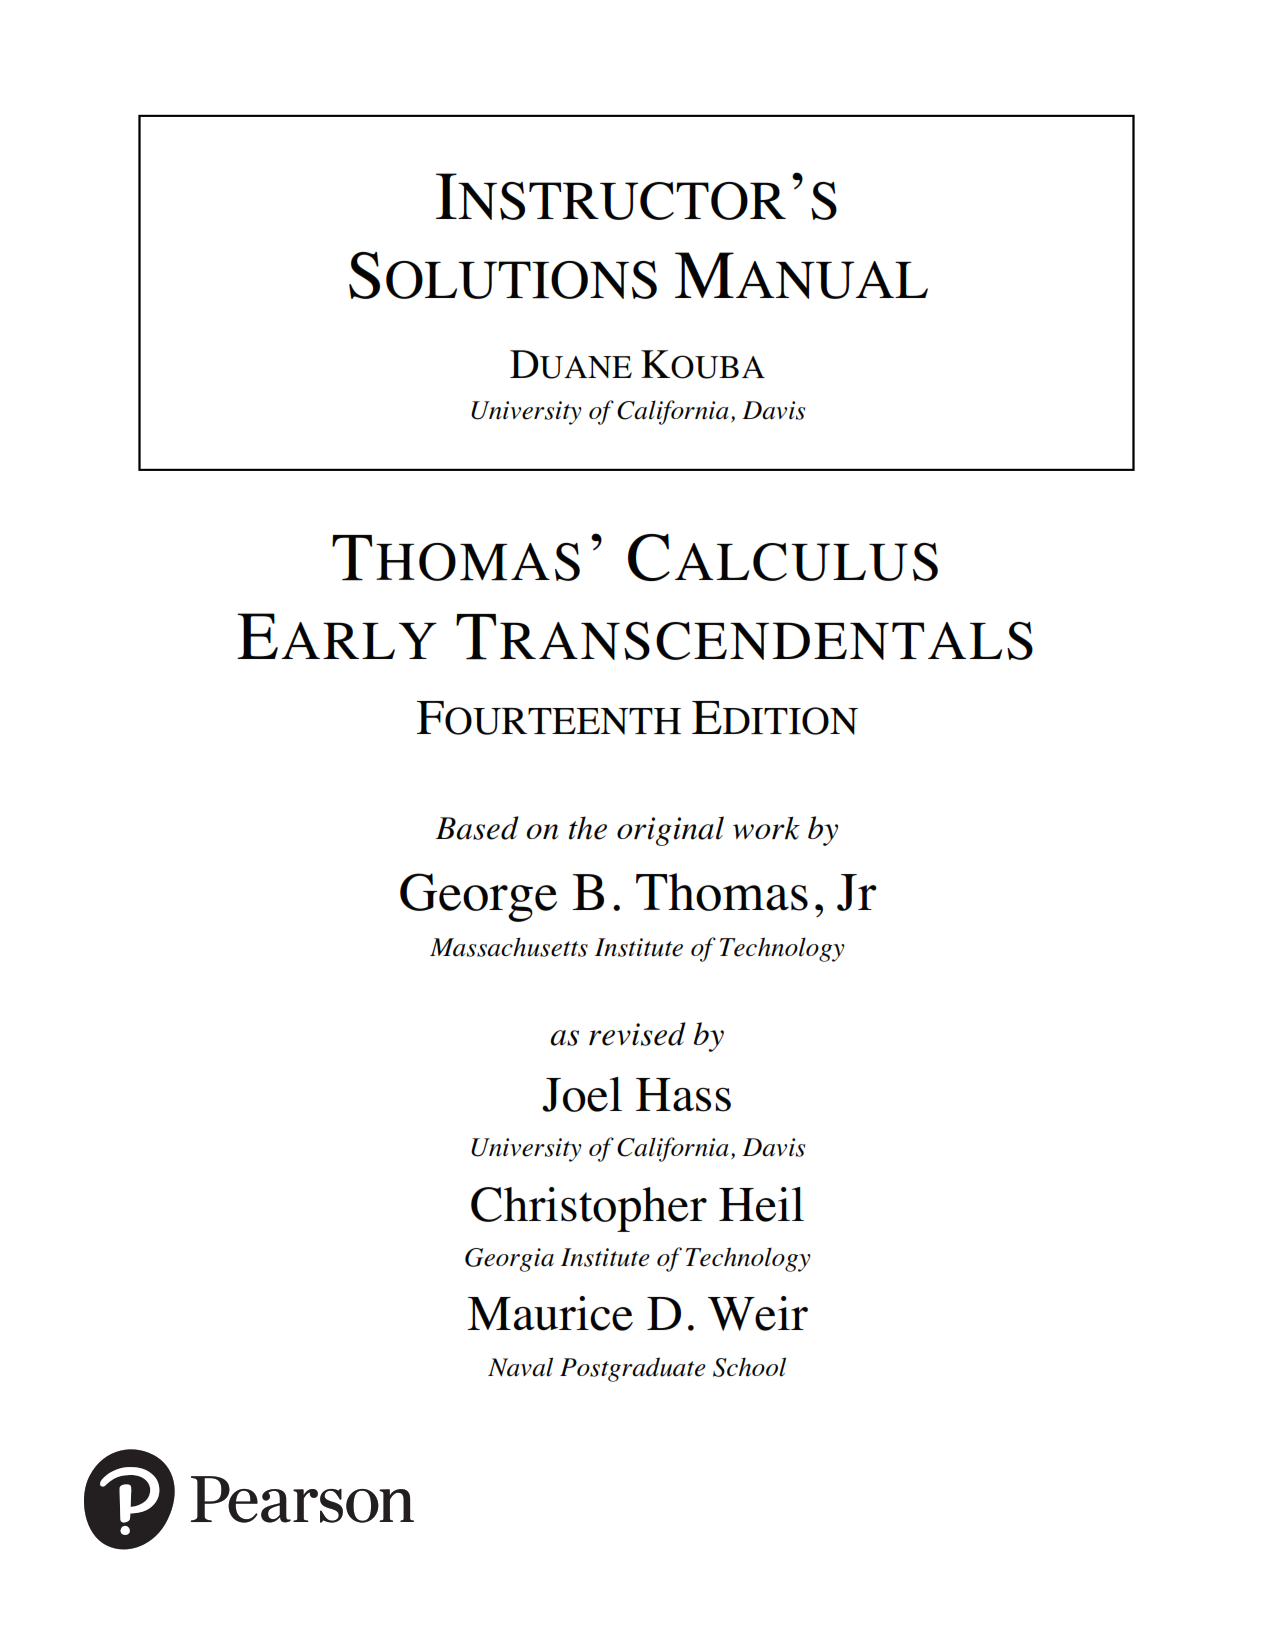 Download free Thomas calculus early transcendentals 14th edition Joel Hass solutions manual & answers key pdf